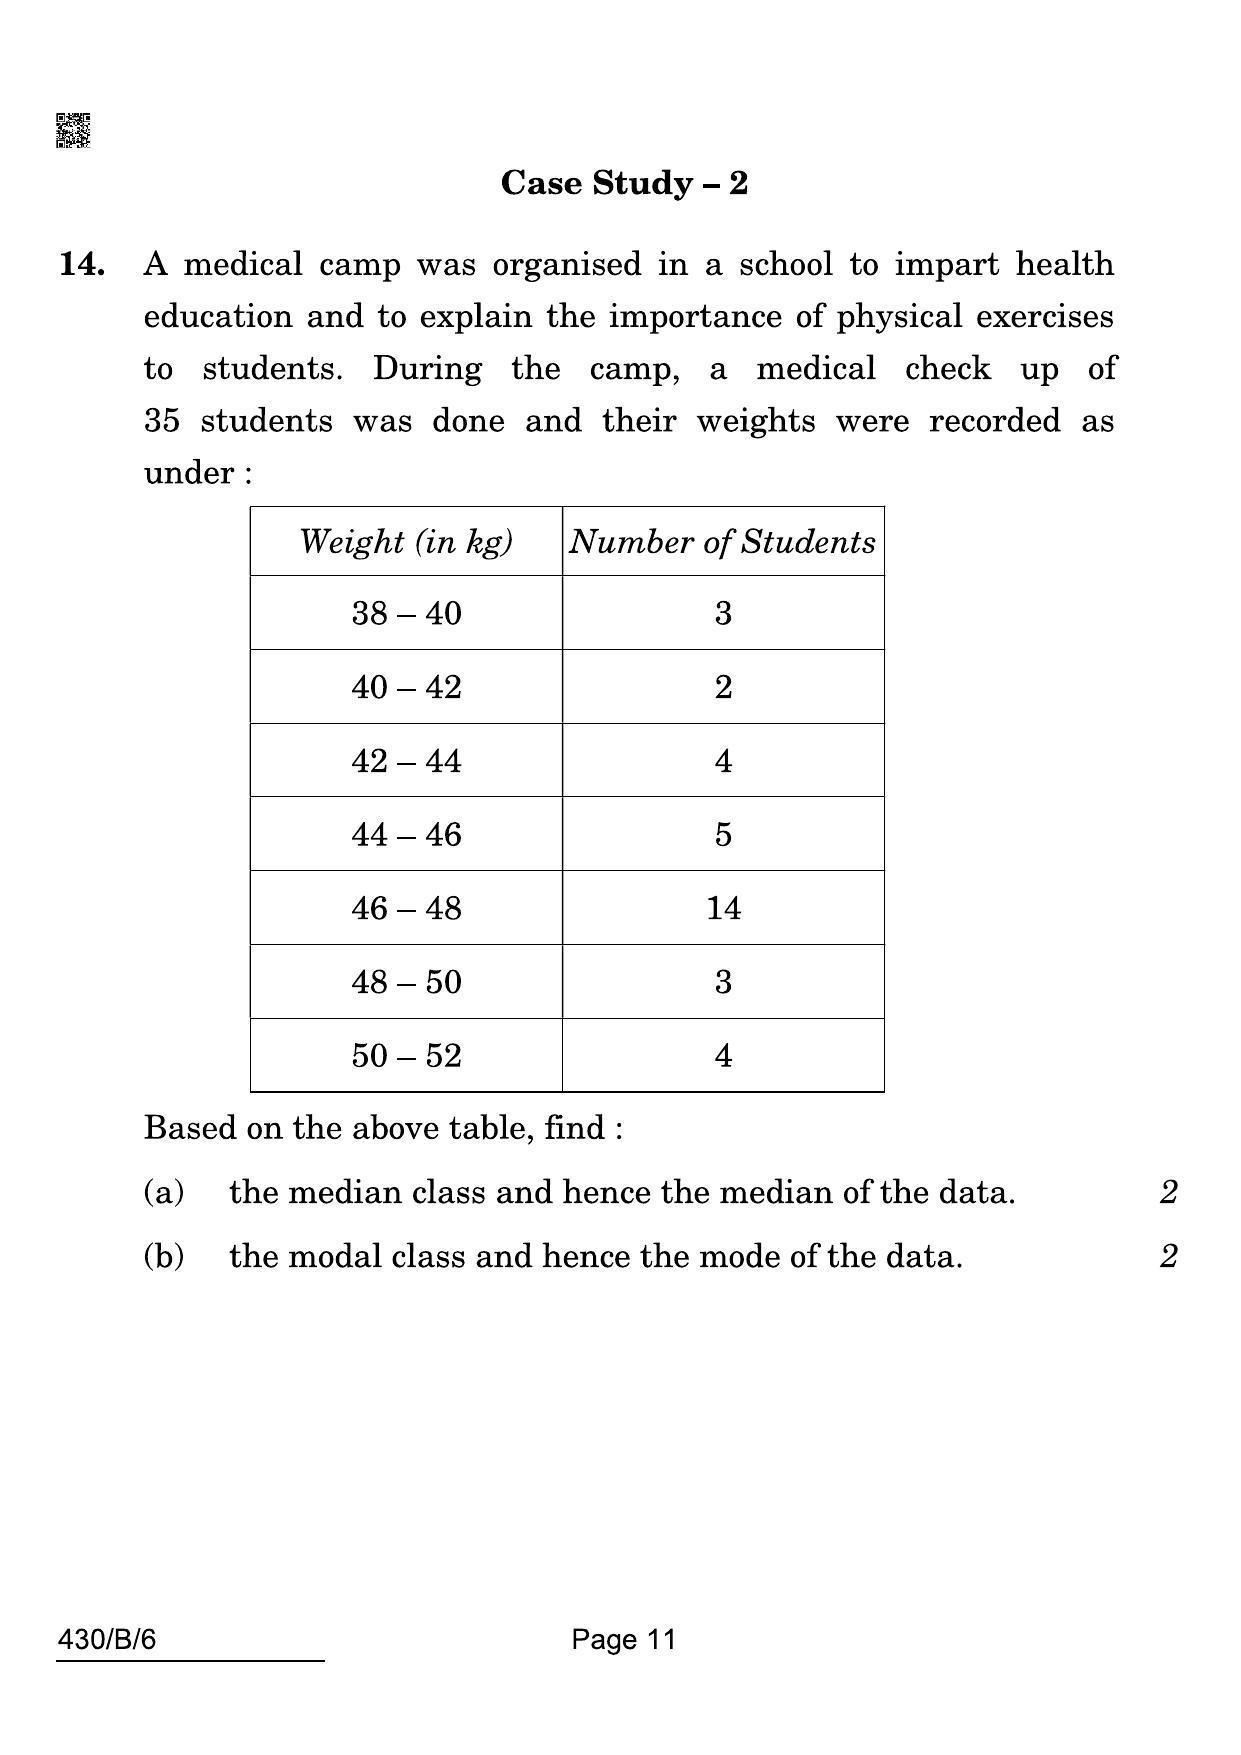 CBSE Class 10 430-B-6 Maths Basic Blind 2022 Compartment Question Paper - Page 11